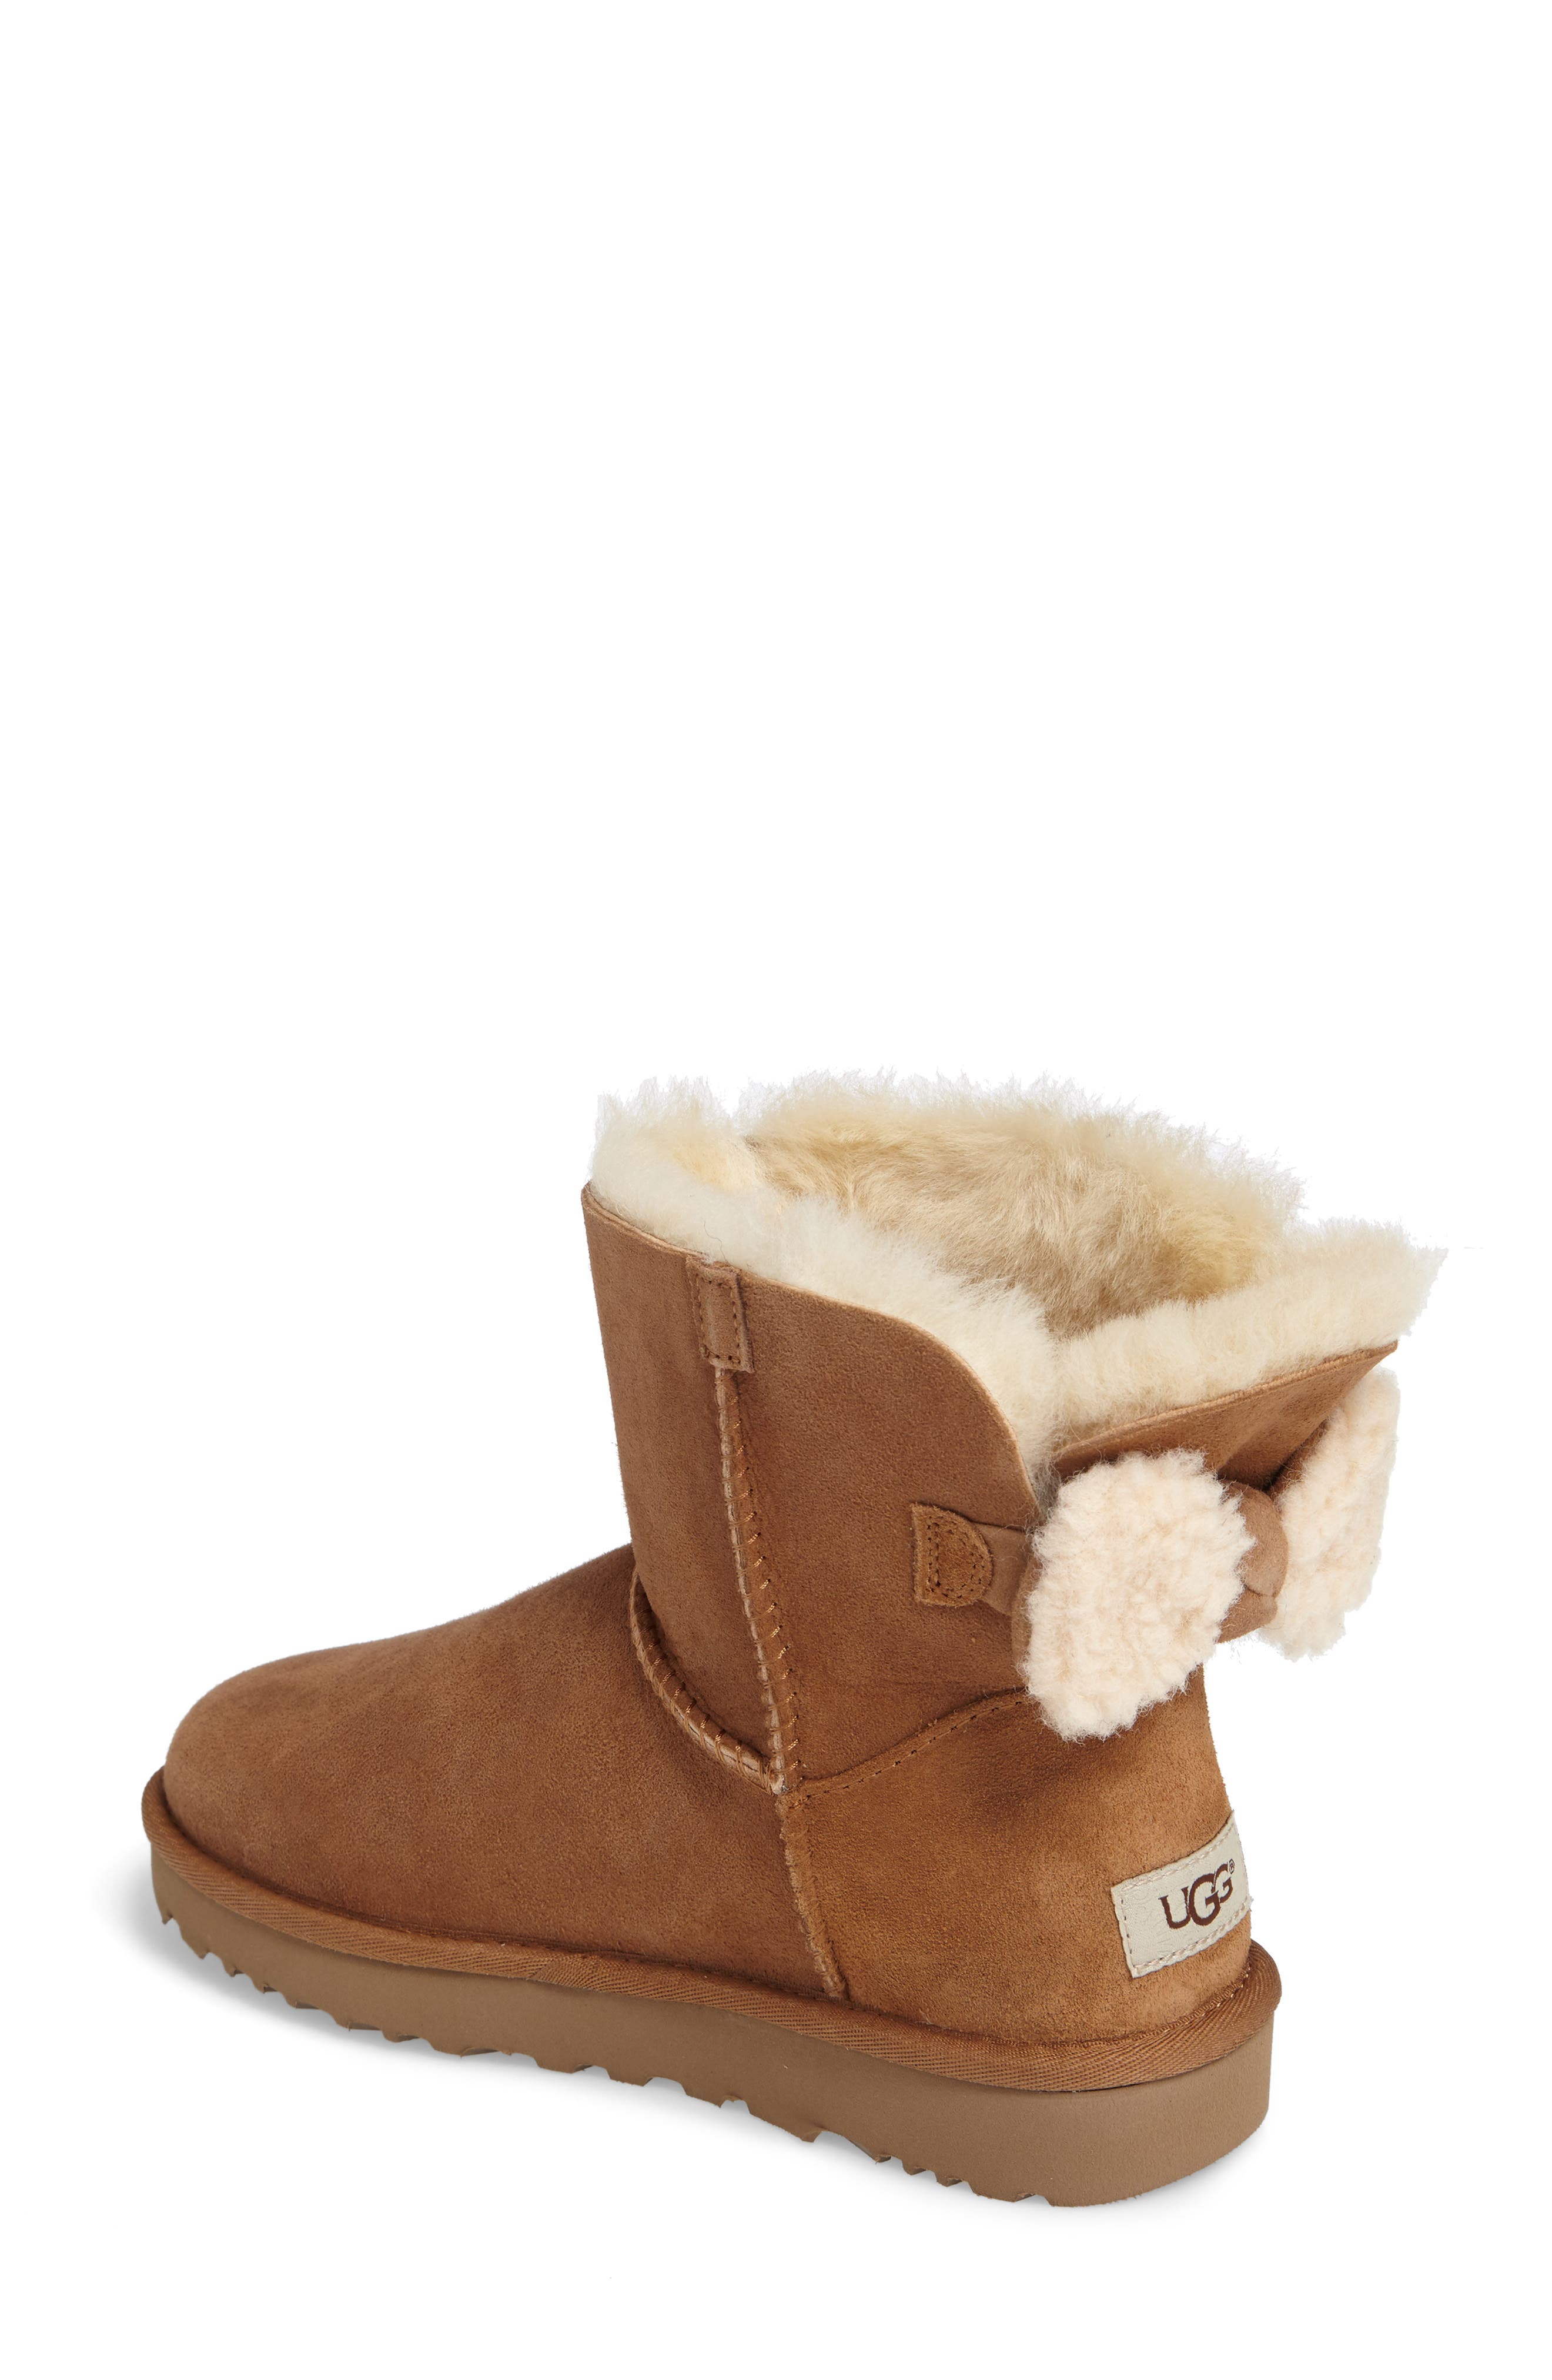 ugg arielle ankle boot